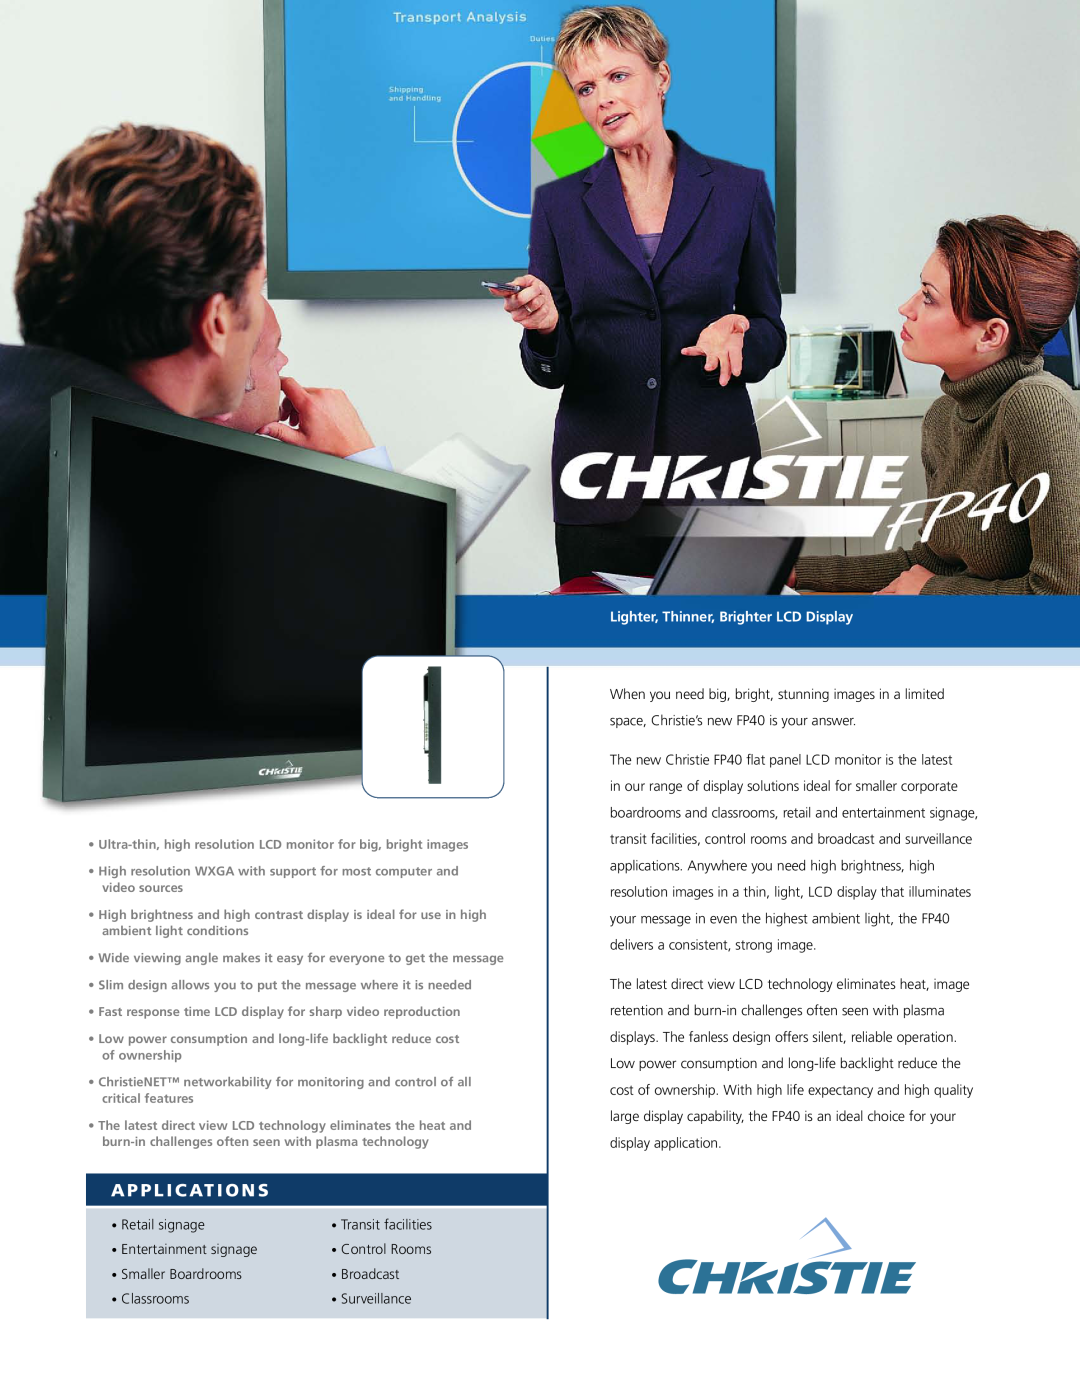 Christie Digital Systems FP40 manual A P P L I C At I O N S, Lighter, Thinner, Brighter LCD Display 